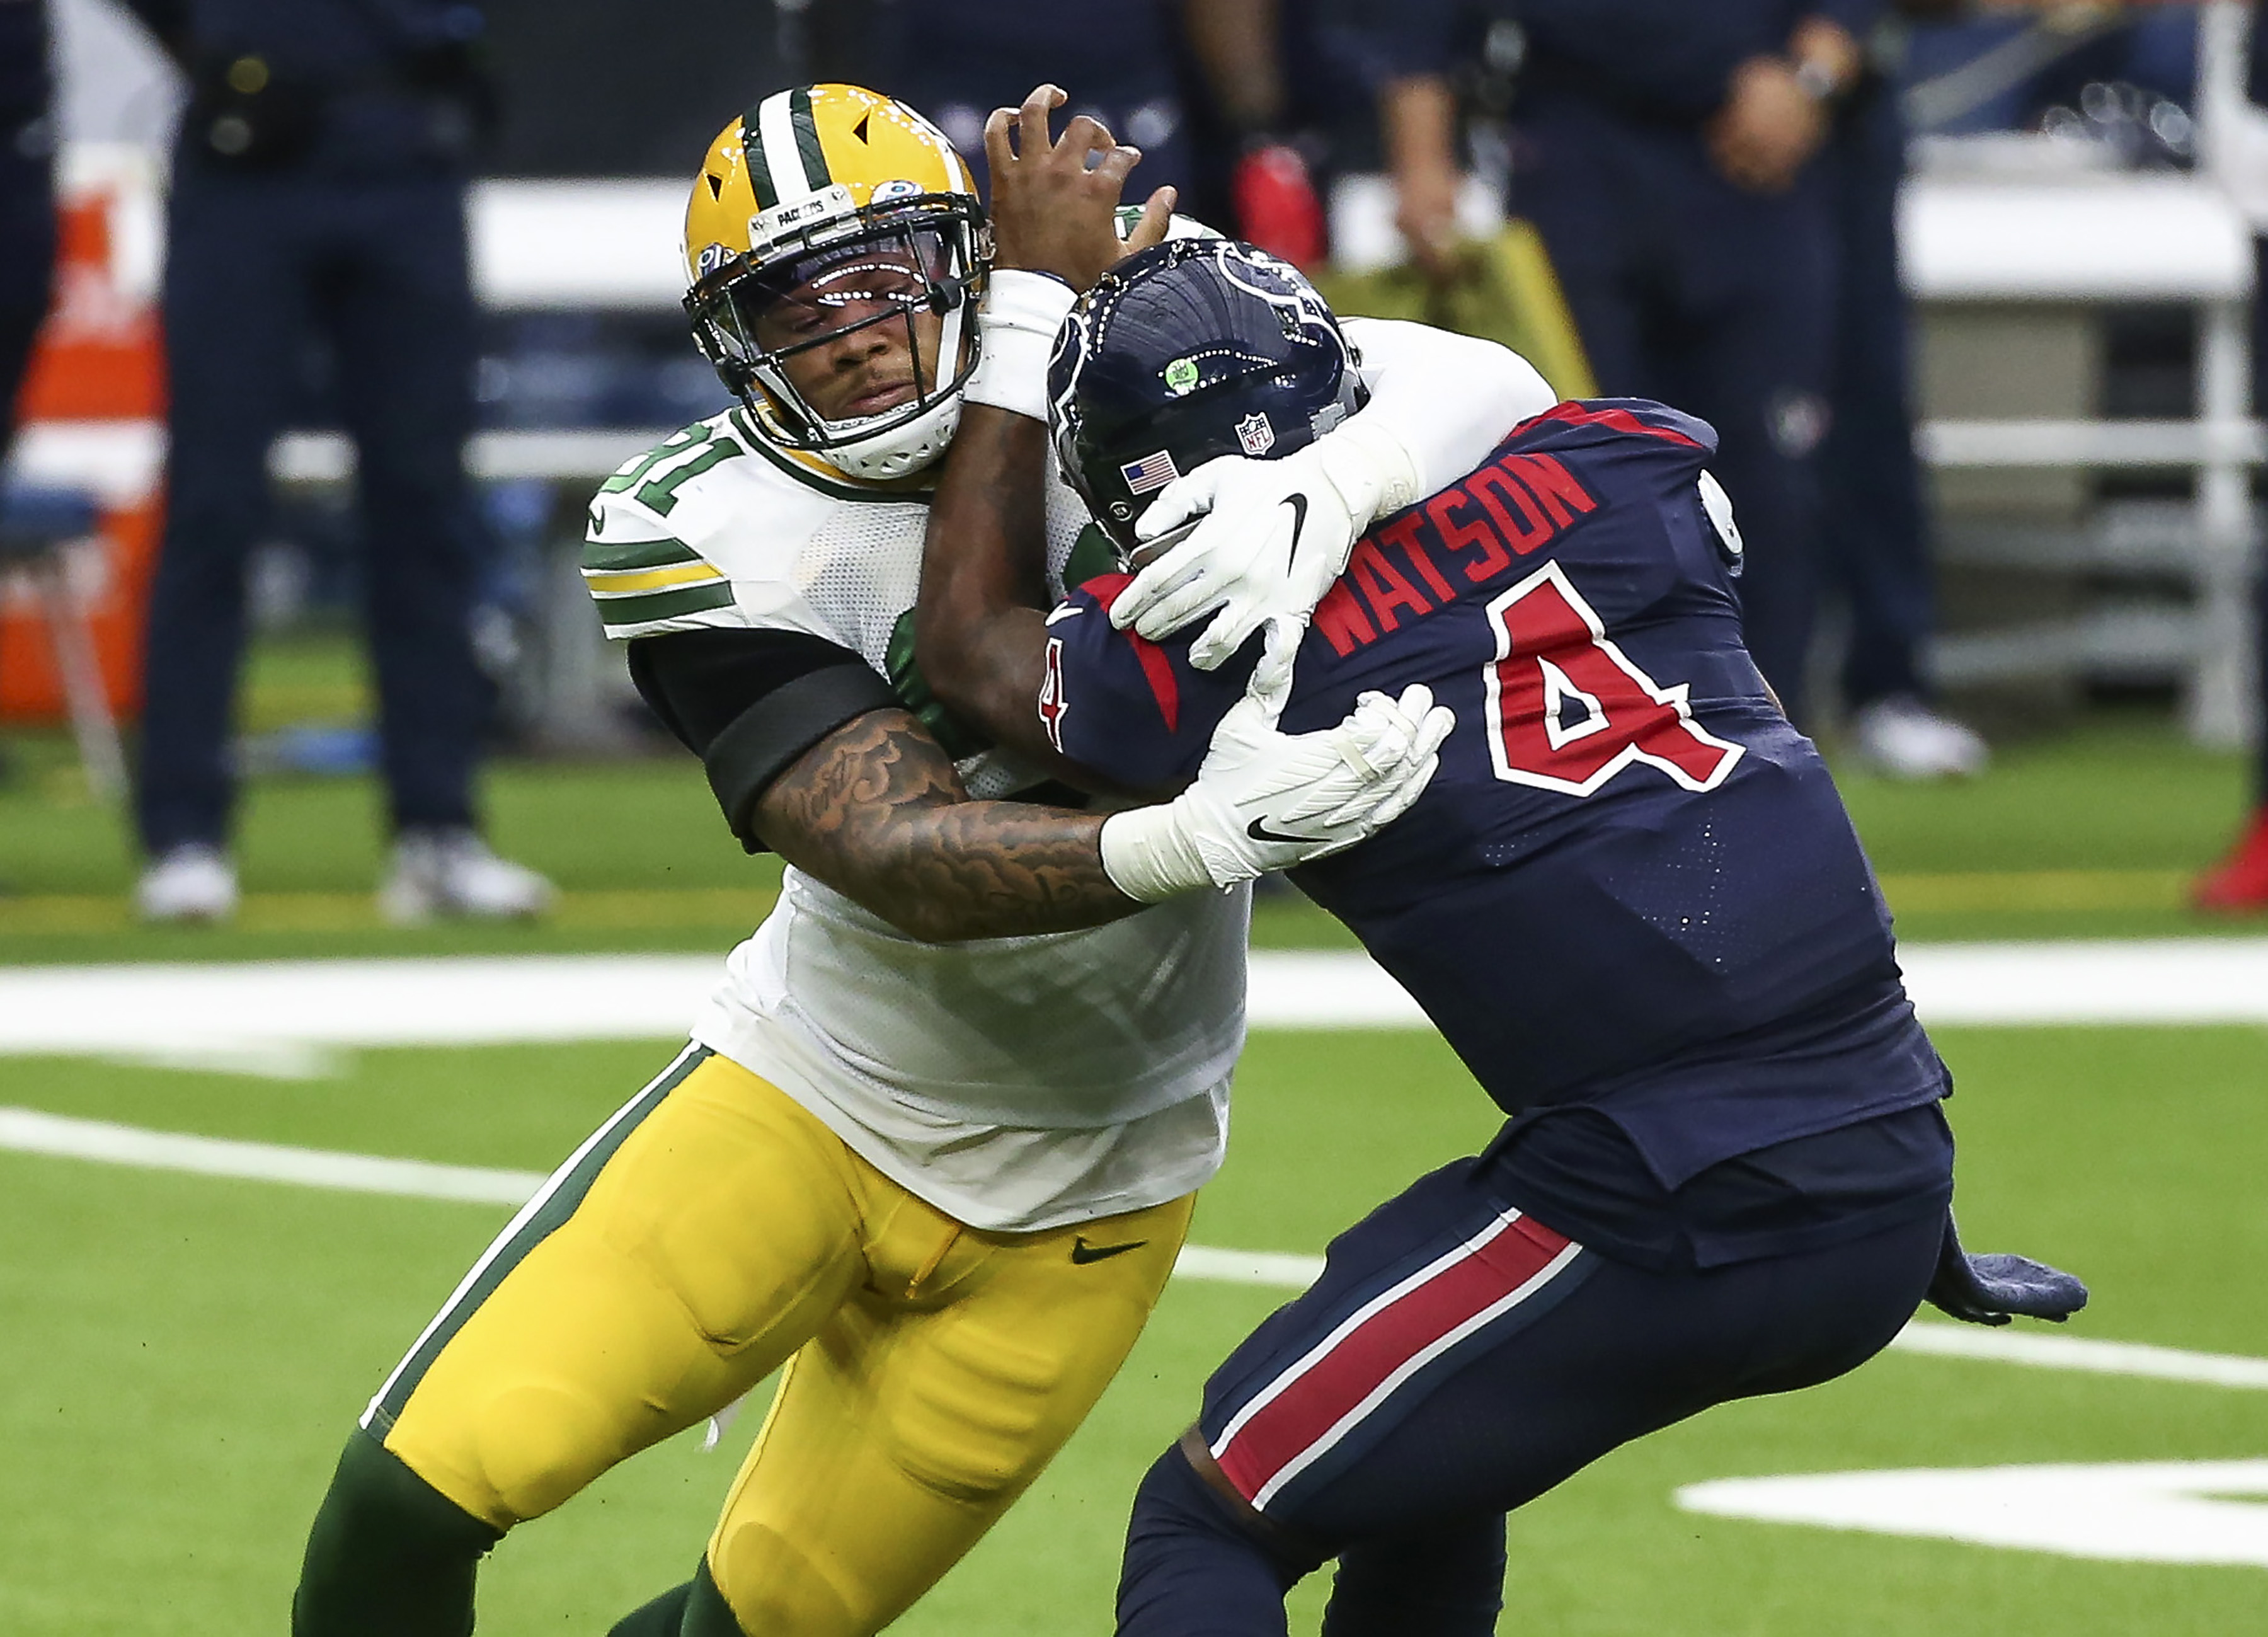 NFL: Green Bay Packers at Houston Texans